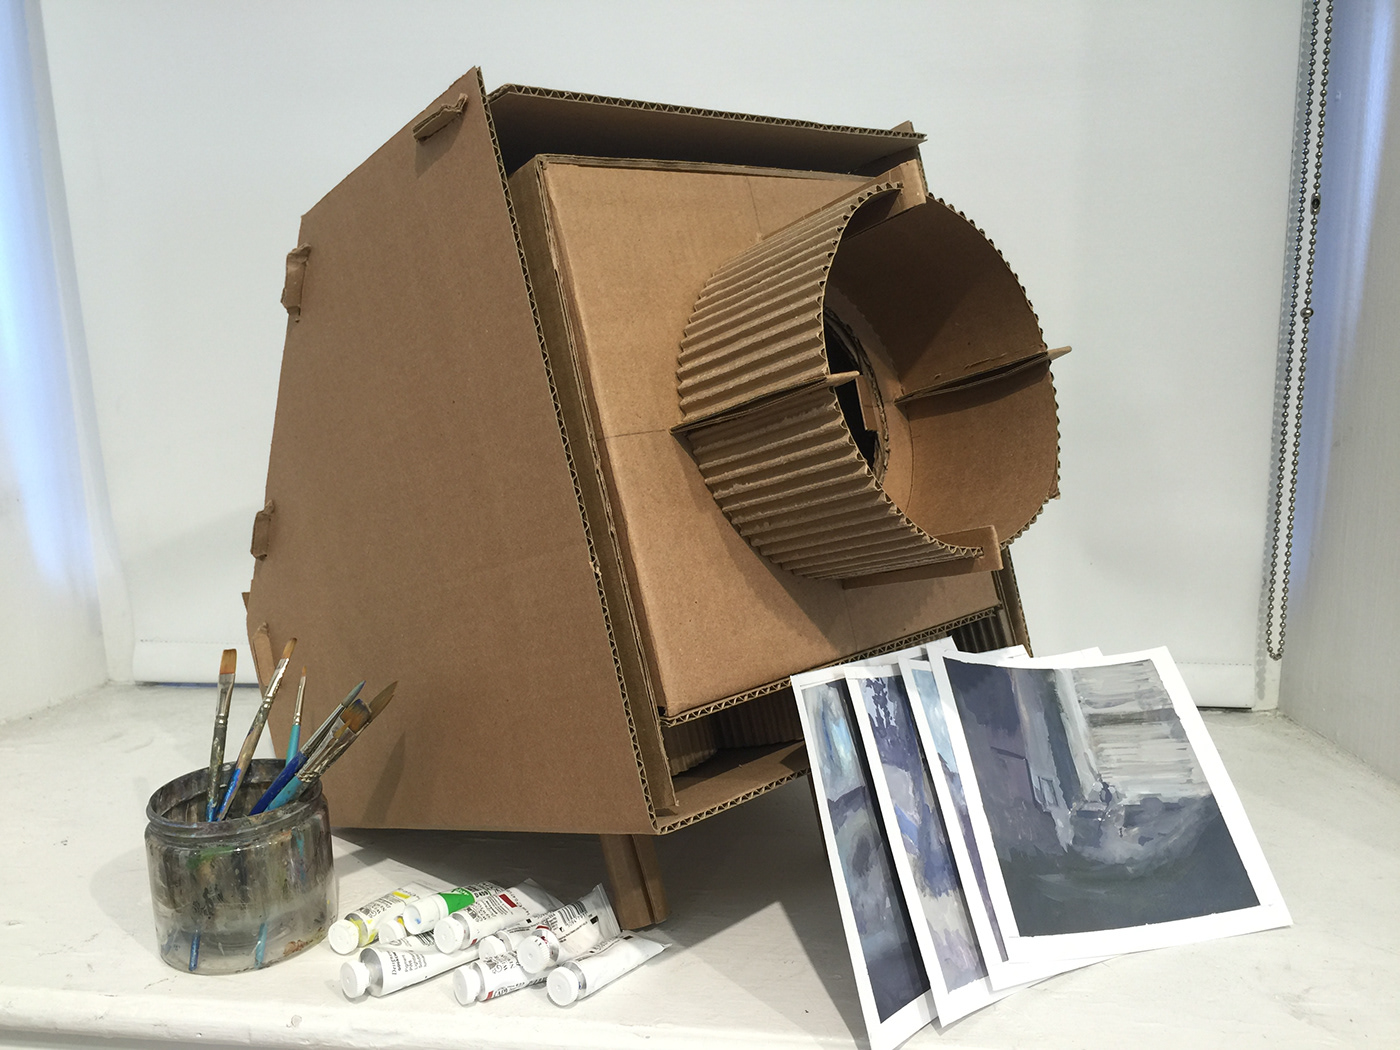 camera camra obscura cardboard gears Gouache paintings painting   industrial design  craft risd RISD Foundations